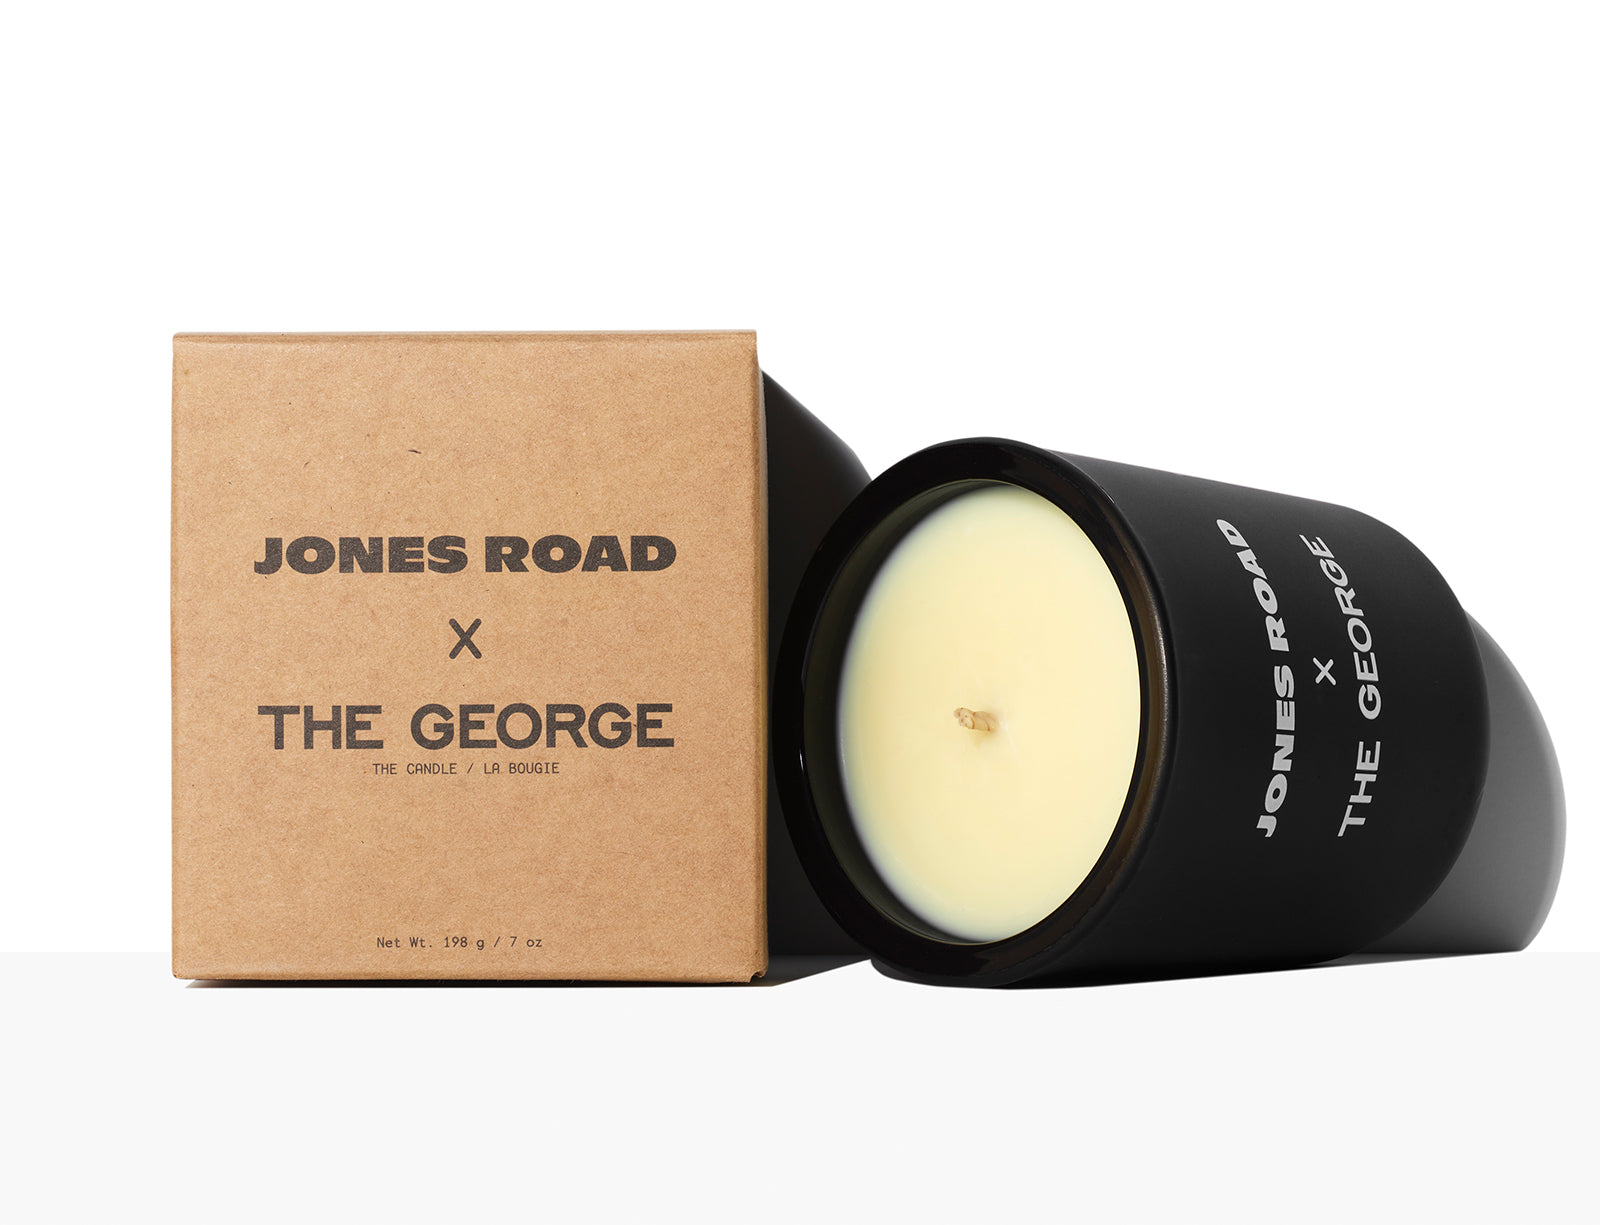 The Jones Road x The George Candle